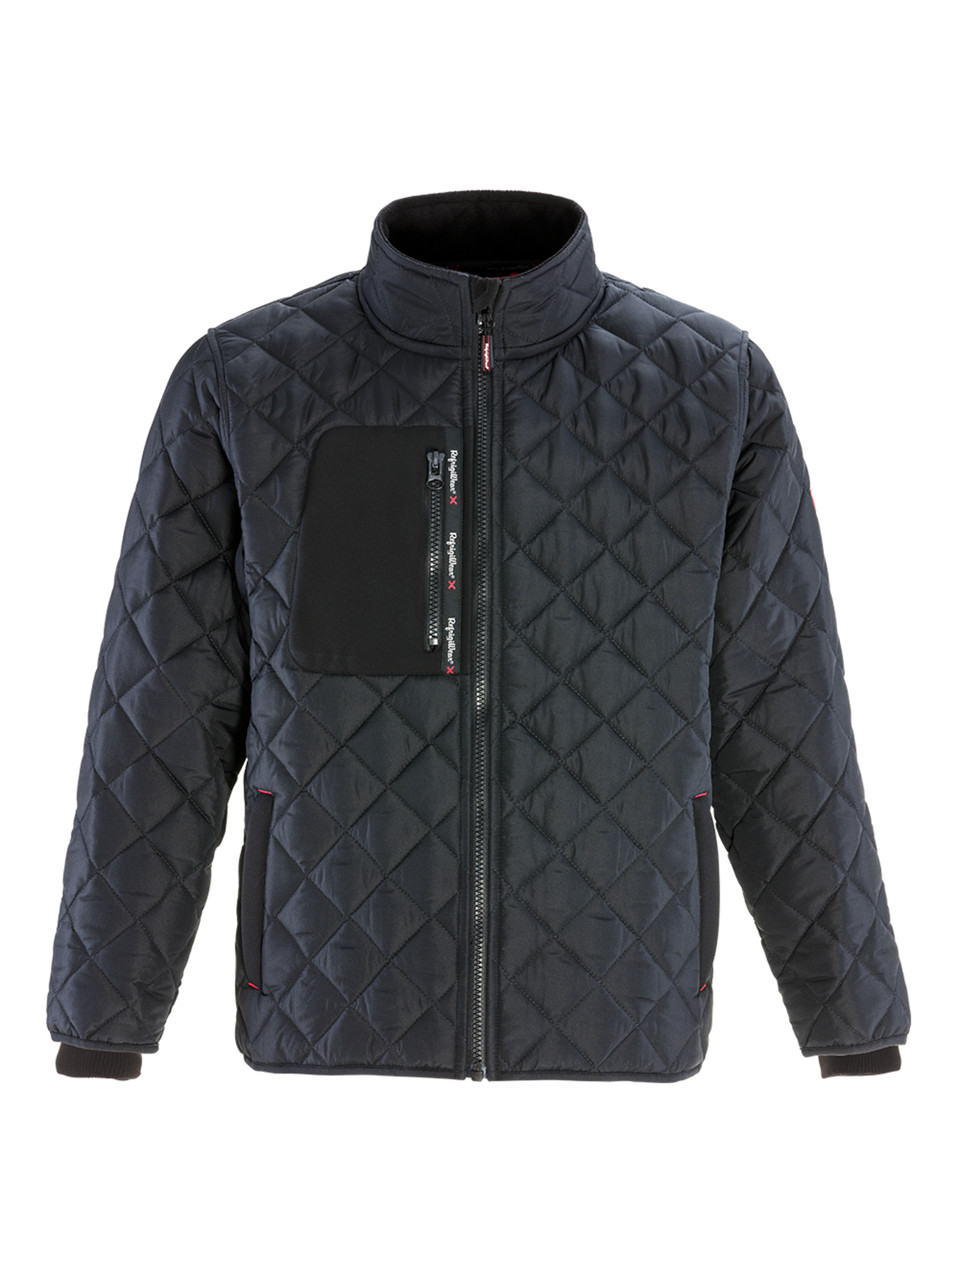 Mens Diamond Quilted Wax Jacket UK | Cotton Wax Jacket - Rydale